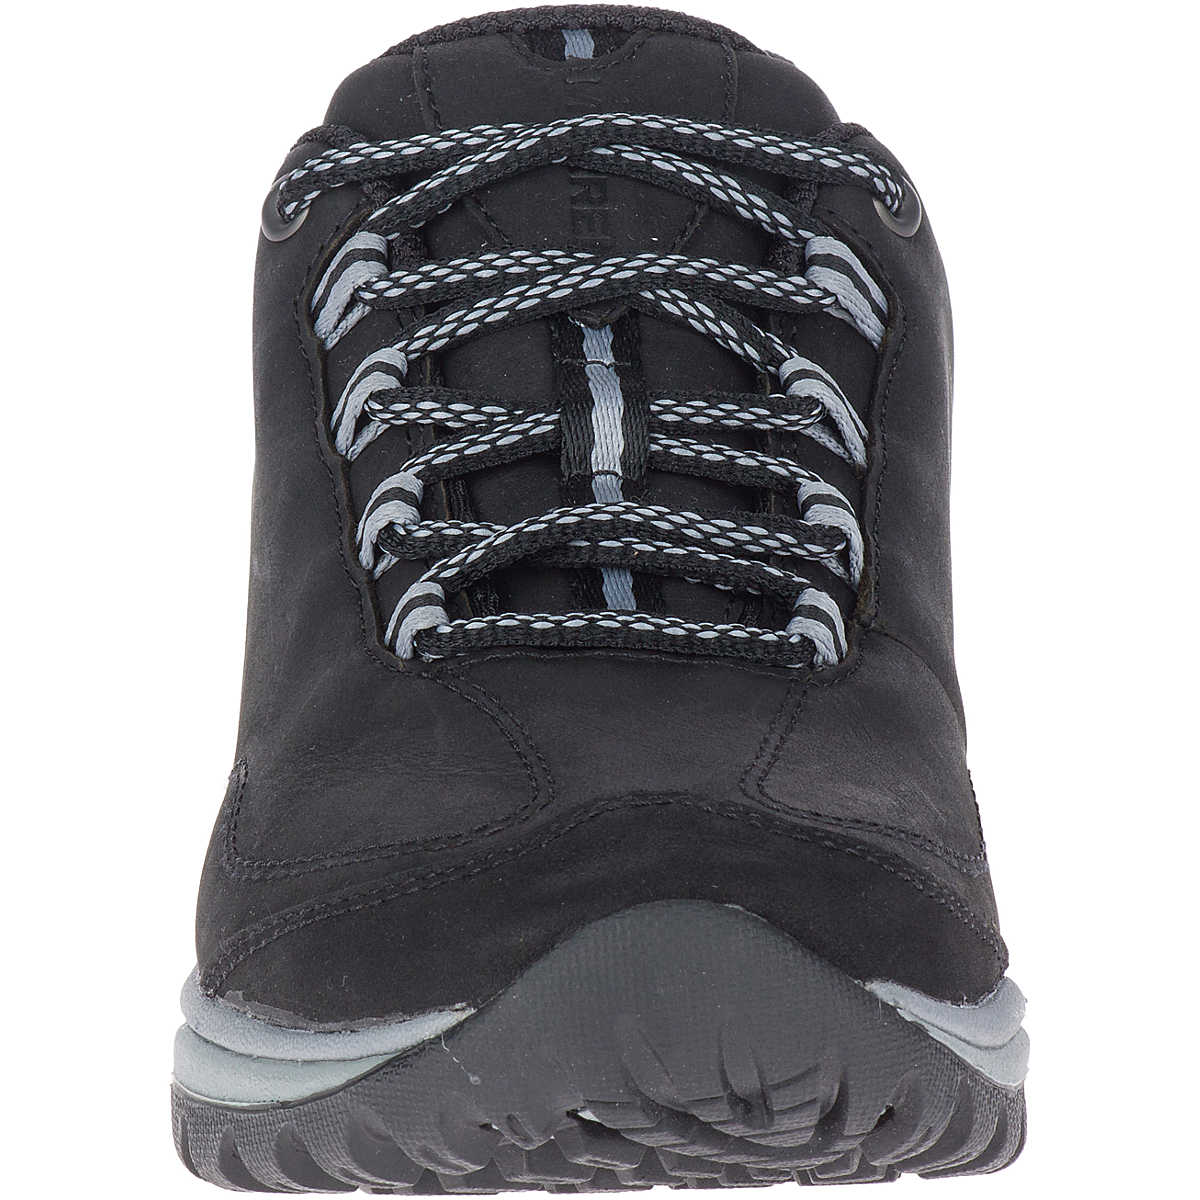 Breathable Mesh Lining - Enhances airflow to keep feet cool and dry during activity.